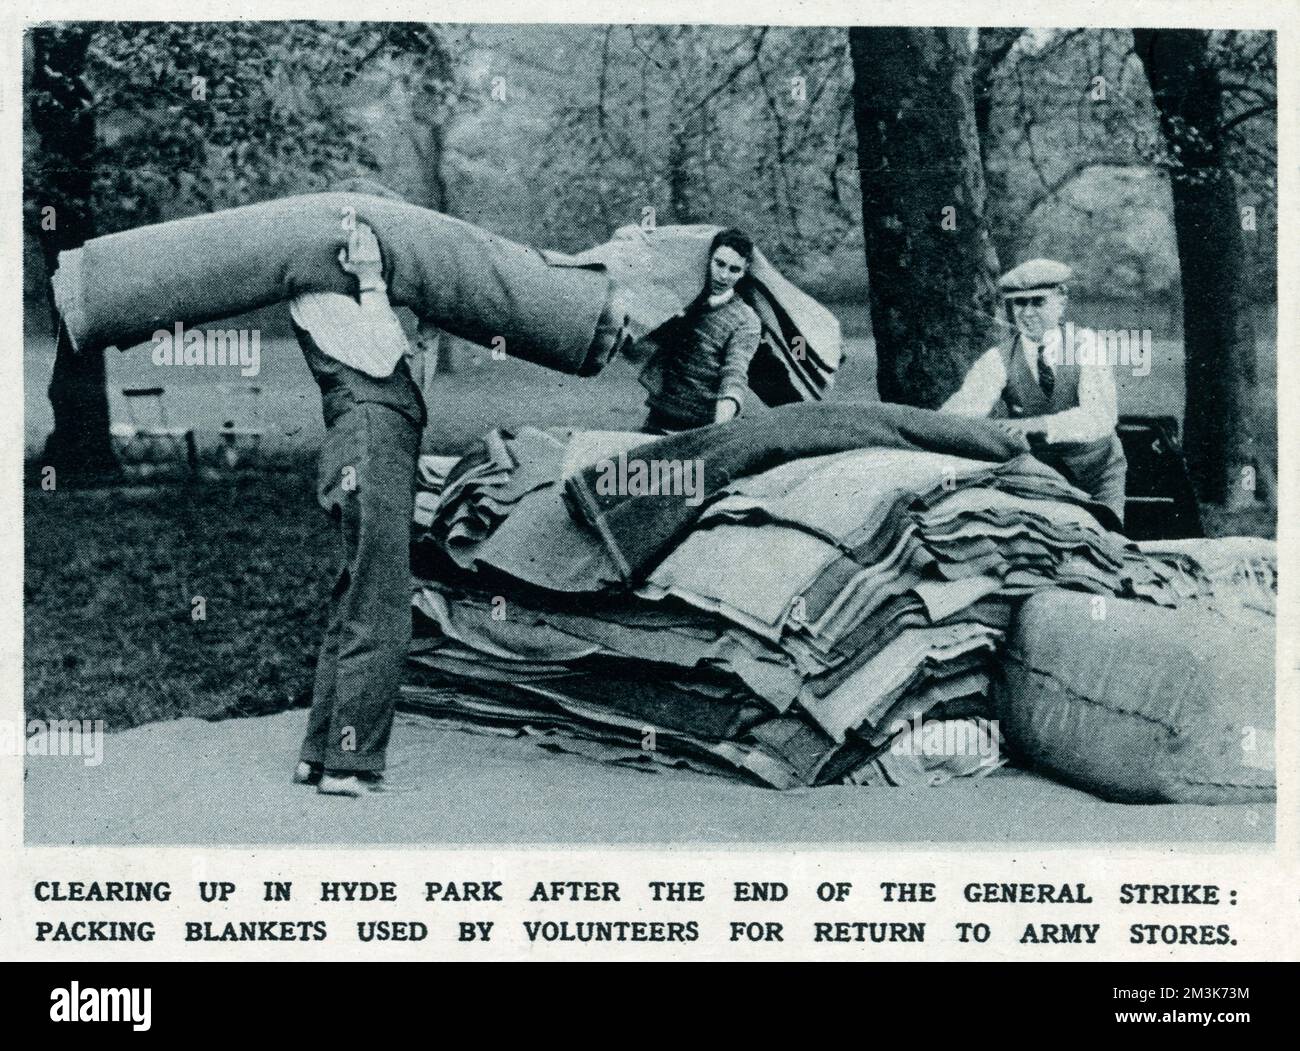 Clearing up in Hyde Park after the end of the General Strike: packing blankets used by volunteers for return to army stores.   In support of a strike by coal miners over the issue of threatened wage cuts, the Trades Union Congress called a General Strike in early May 1926. The strike only involved certain key industrial sectors (docks, electricity, gas, railways) but, in the face of well-organised government emergency measures and lack of real public support, it collapsed after nine days     Date: 1926 Stock Photo